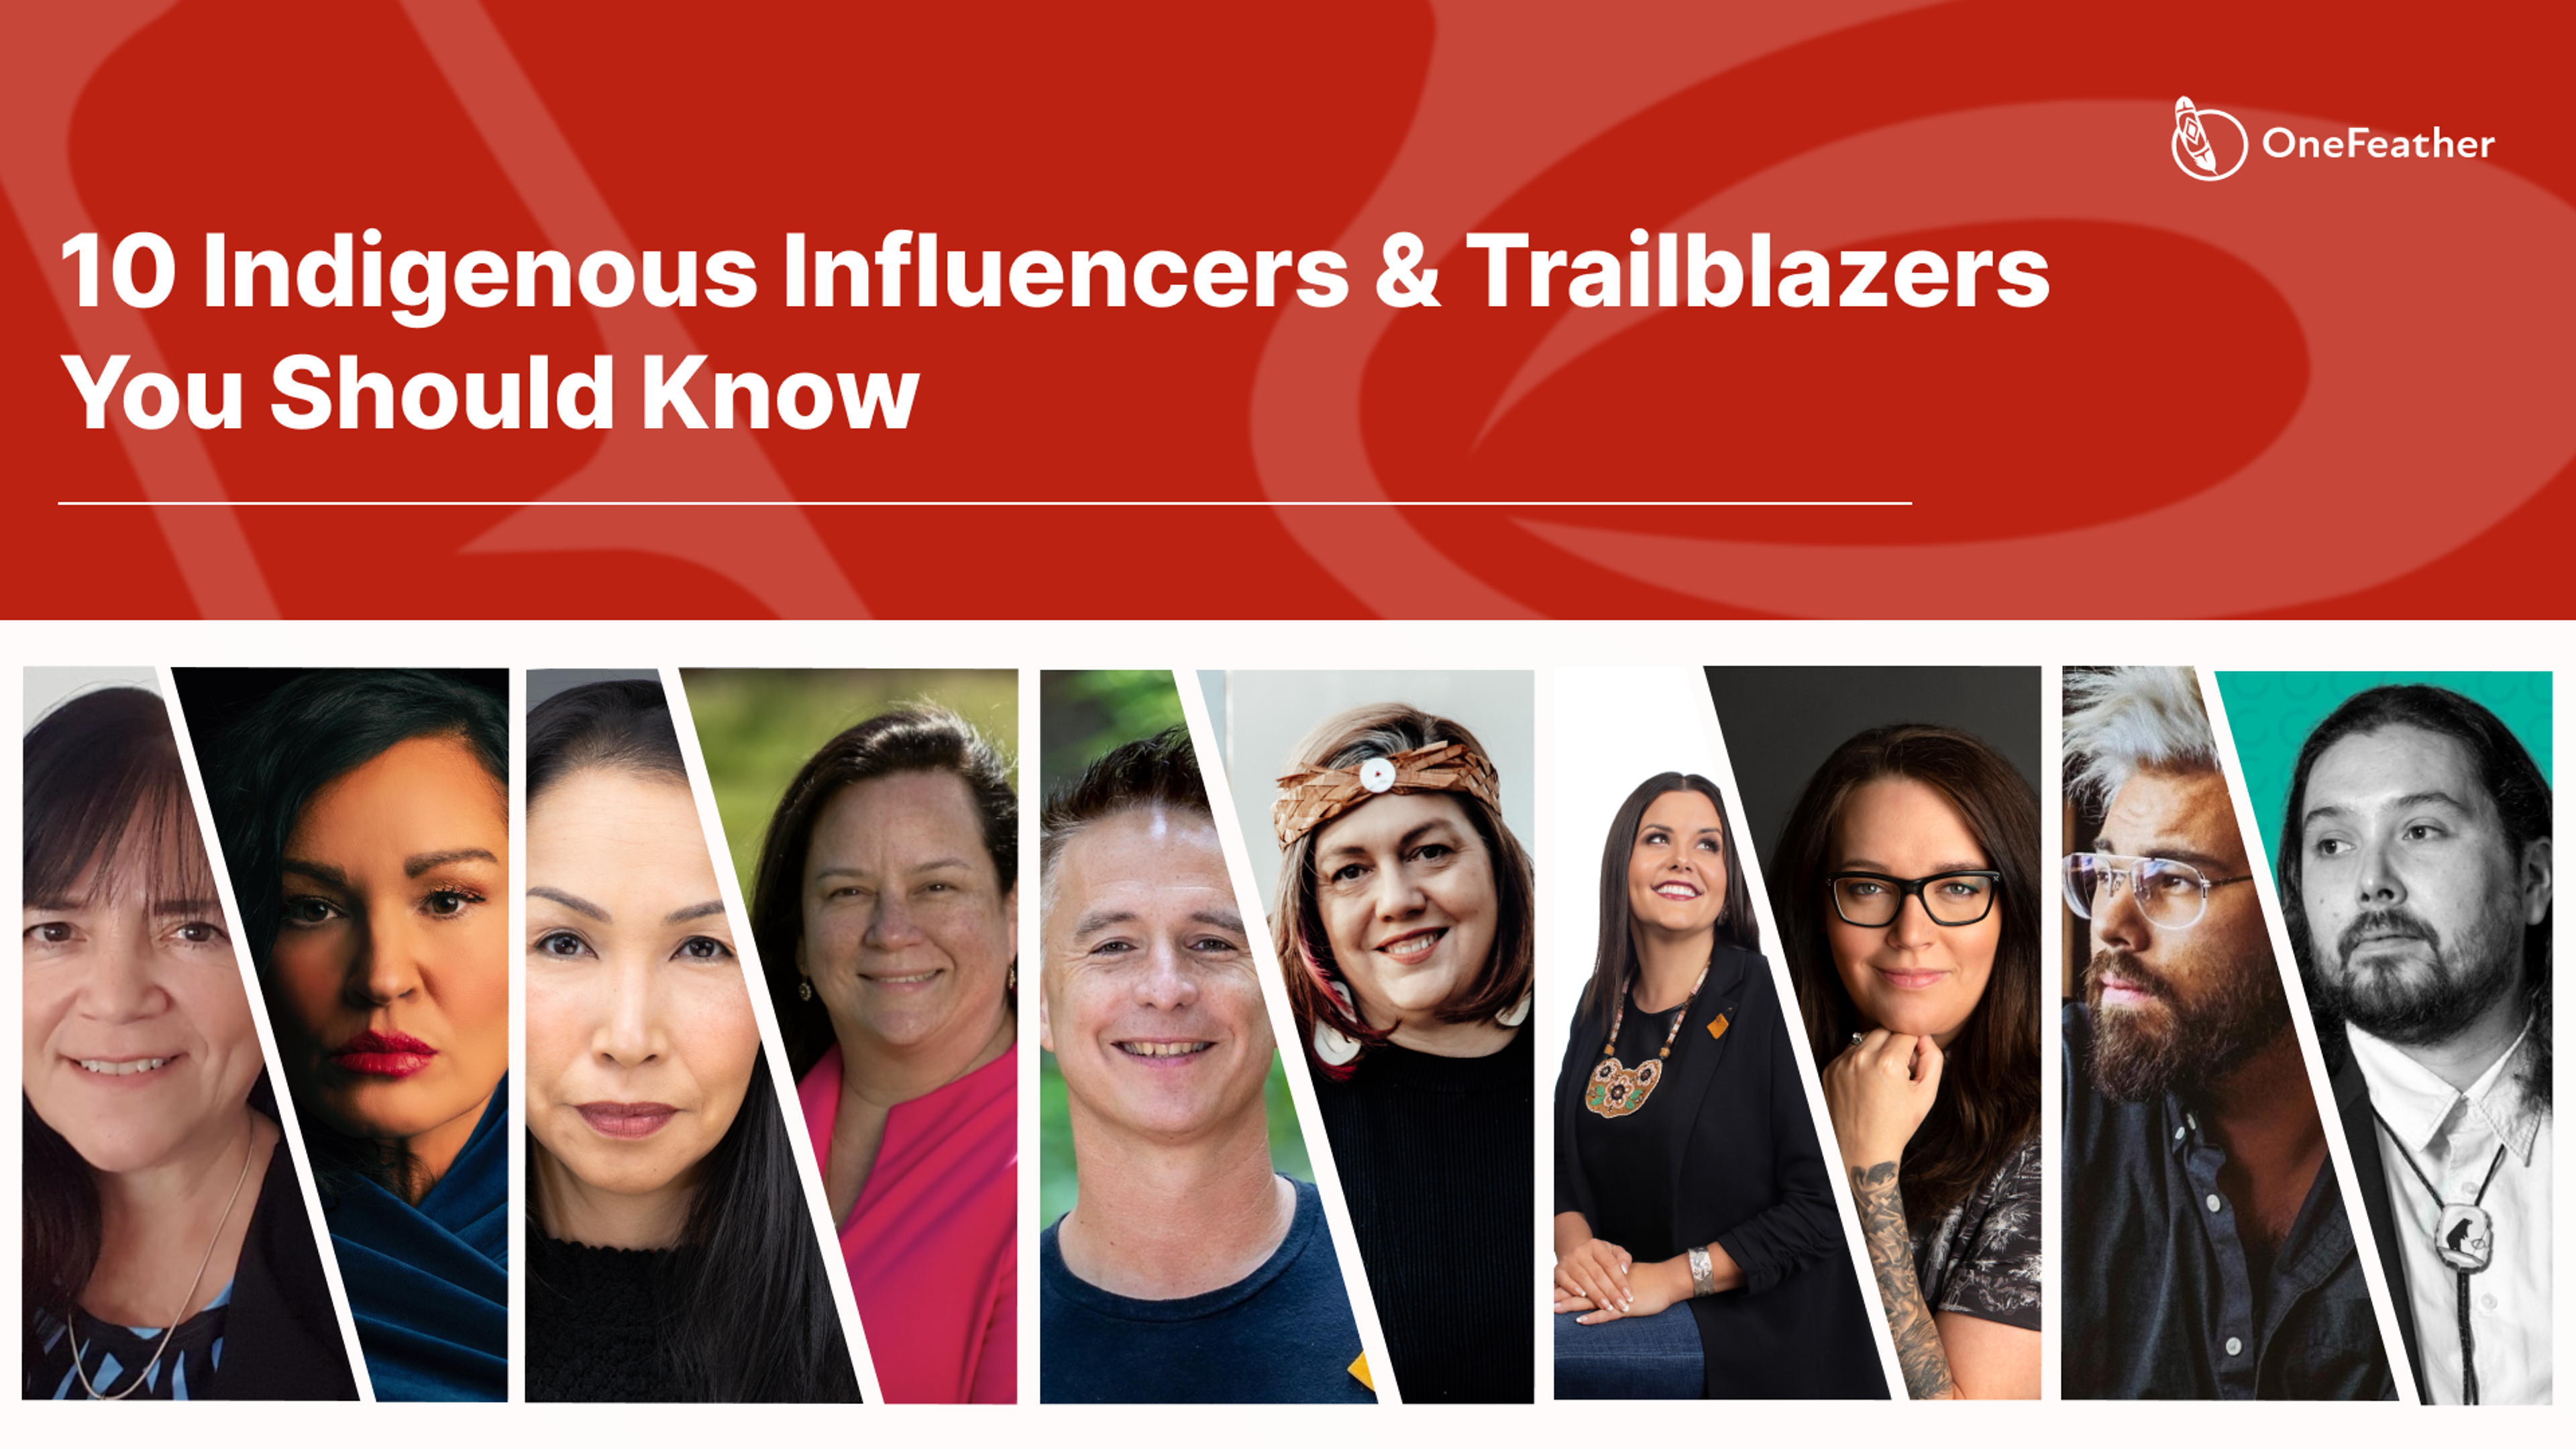 Cover Image for 10 Indigenous Influencers & Trailblazers You Should Know